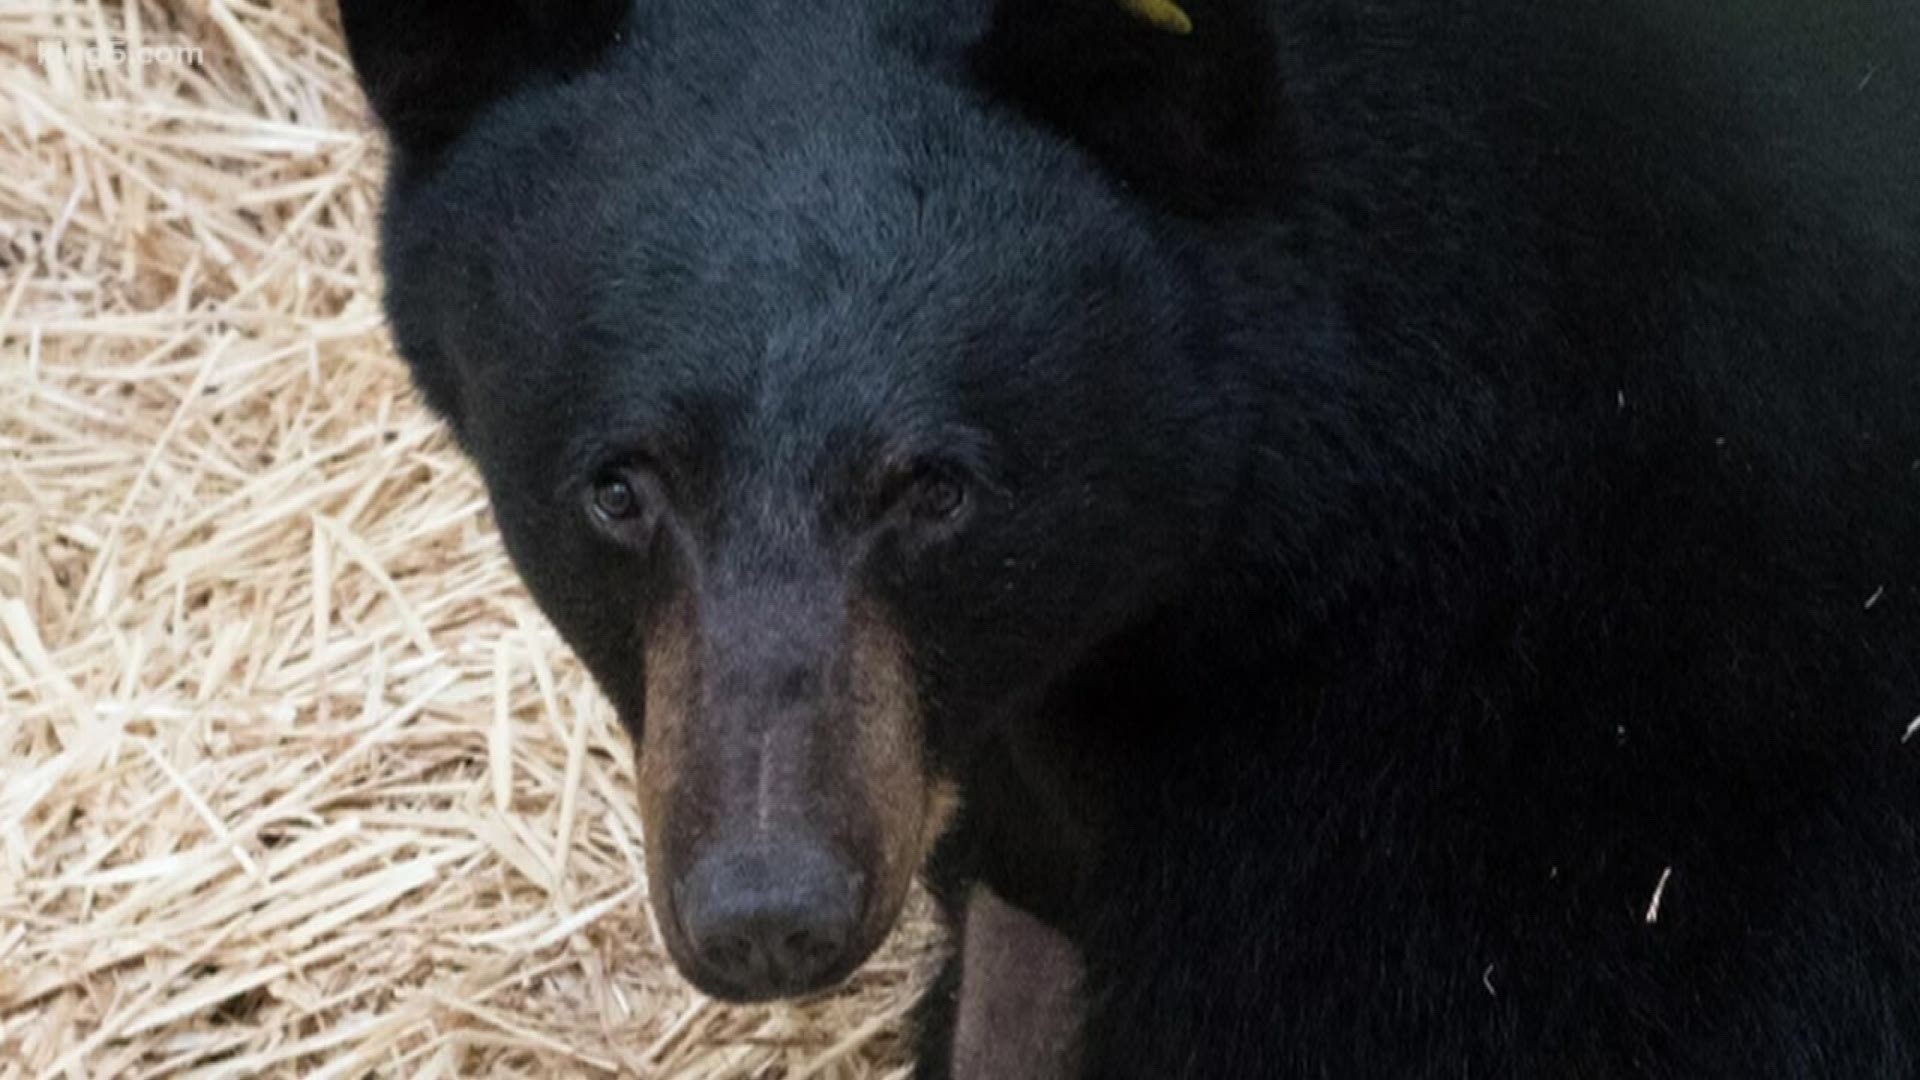 Wildlife officials and veterinarians spoke for the first time about their team effort to save a bear that nearly died after she was hit by a car. KING 5 Environmental Reporter Alison Morrow was there to see what they described as a "very lucky bear."